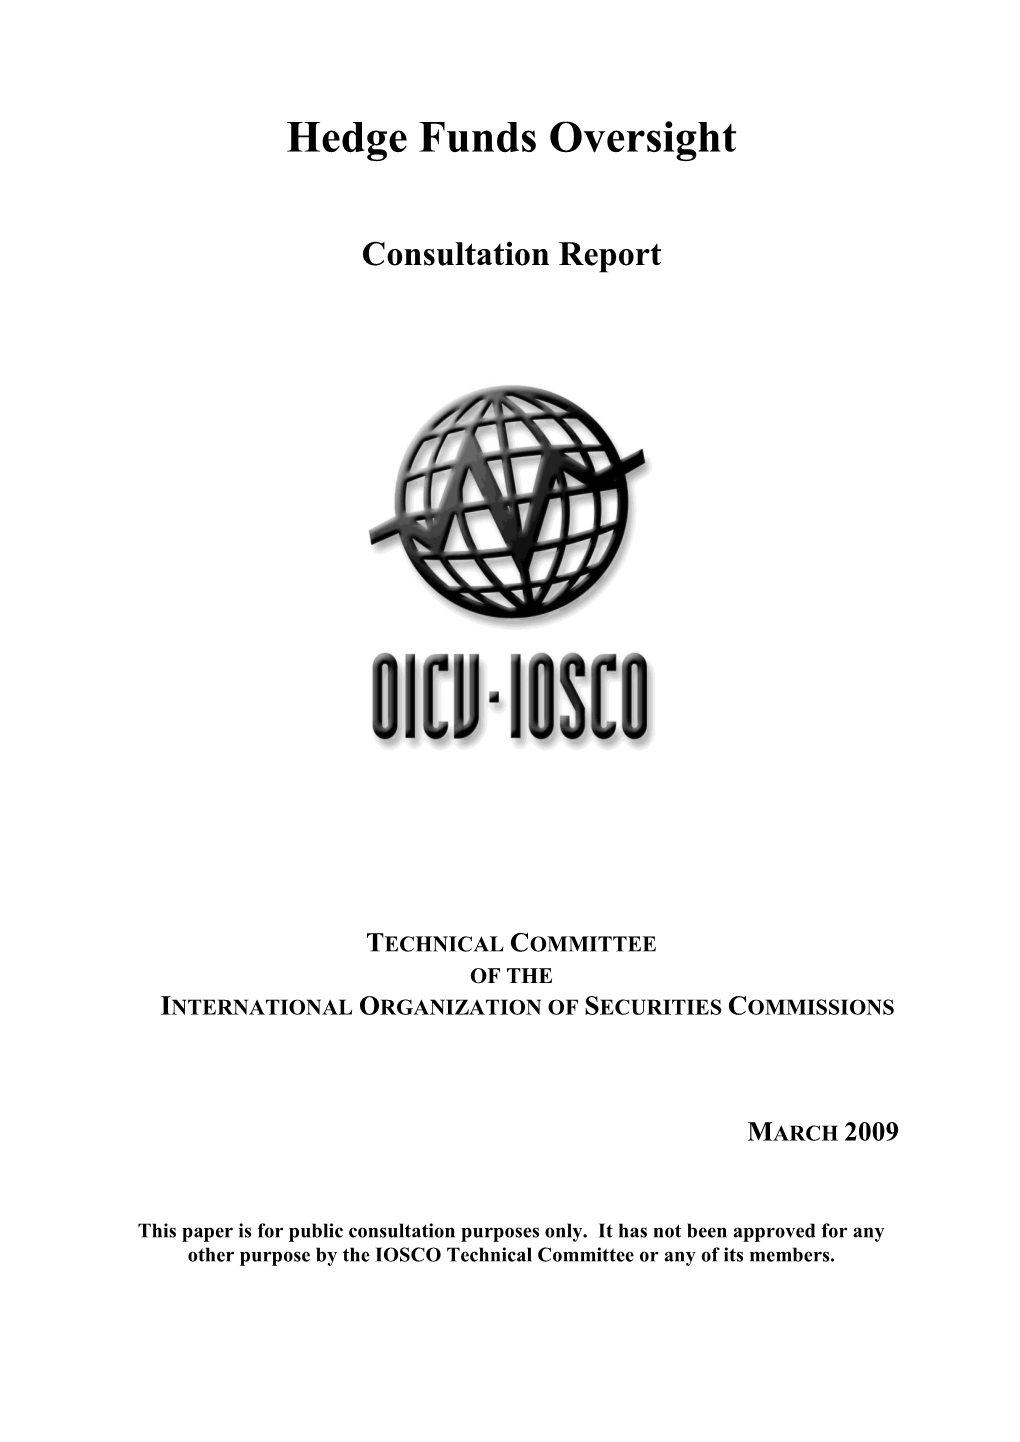 Hedge Funds Oversight, Report of the Technical Committee Of